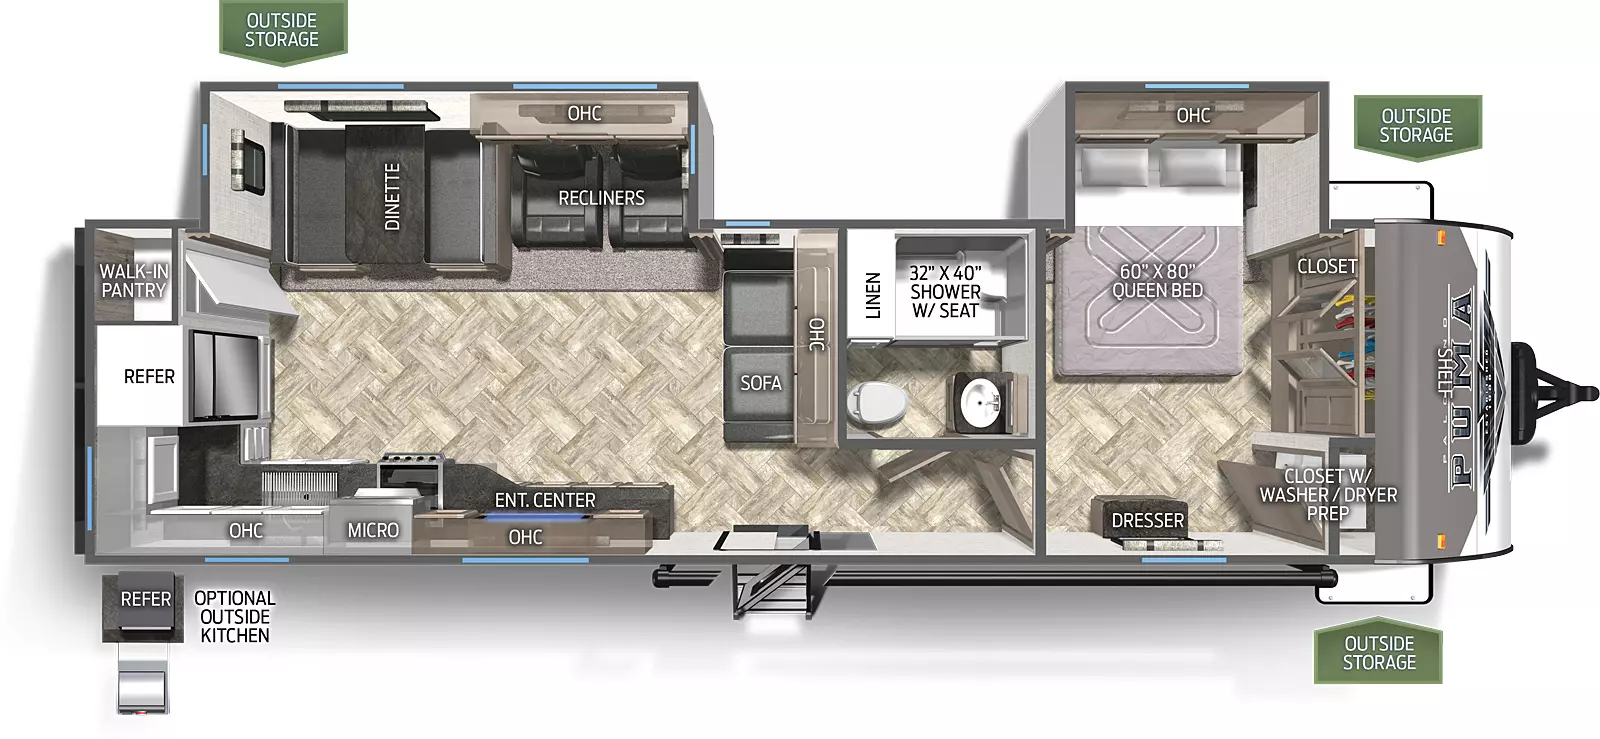 The 30RKQS has two slide outs on the off door side. Exterior features include a 21 foot awning on the door side along with a micro outside kitchen with griddle. Interior layout from front to back: front bedroom with slide out containing a queen bed; bedroom has a large closet and washer/dryer prep; leads out to bathroom on the right; three cushion sofa; slide out containing two recliners and a booth dinette; entertainment center; rear kitchen with a cooktop stove, microwave, residential refrigerator and a walk in pantry.